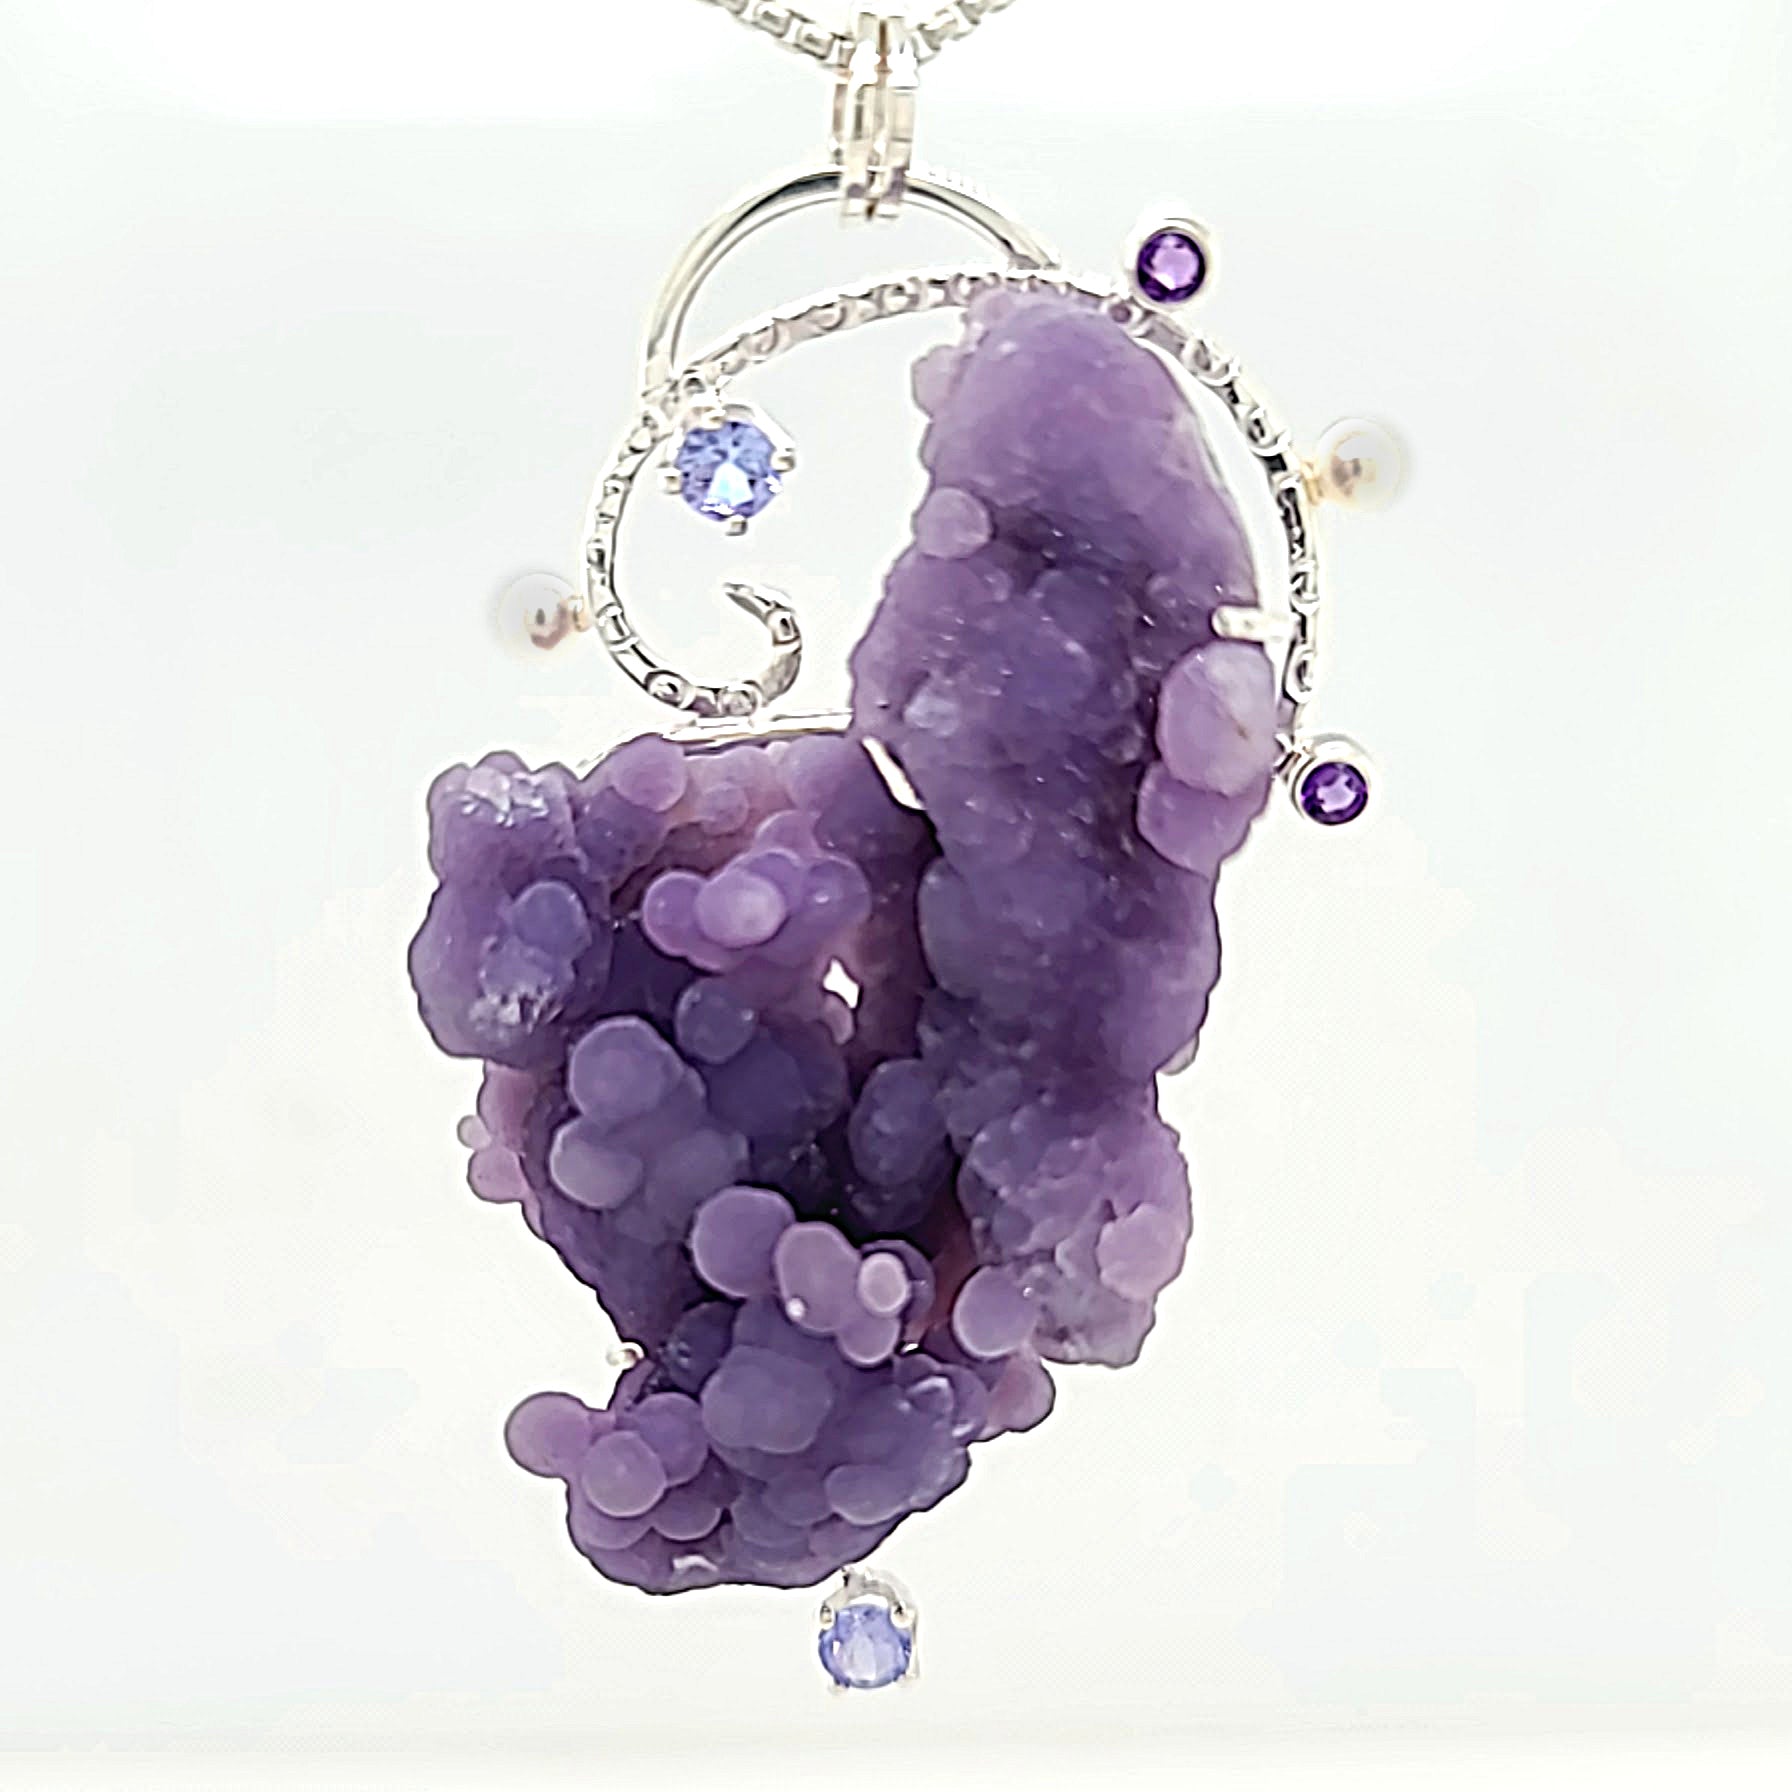 Grape Agate Pendant in Sterling Silver with Tanzanite, Amethyst and Freshwater Pearl Pendant with Purple with Sterling Silver Chain.